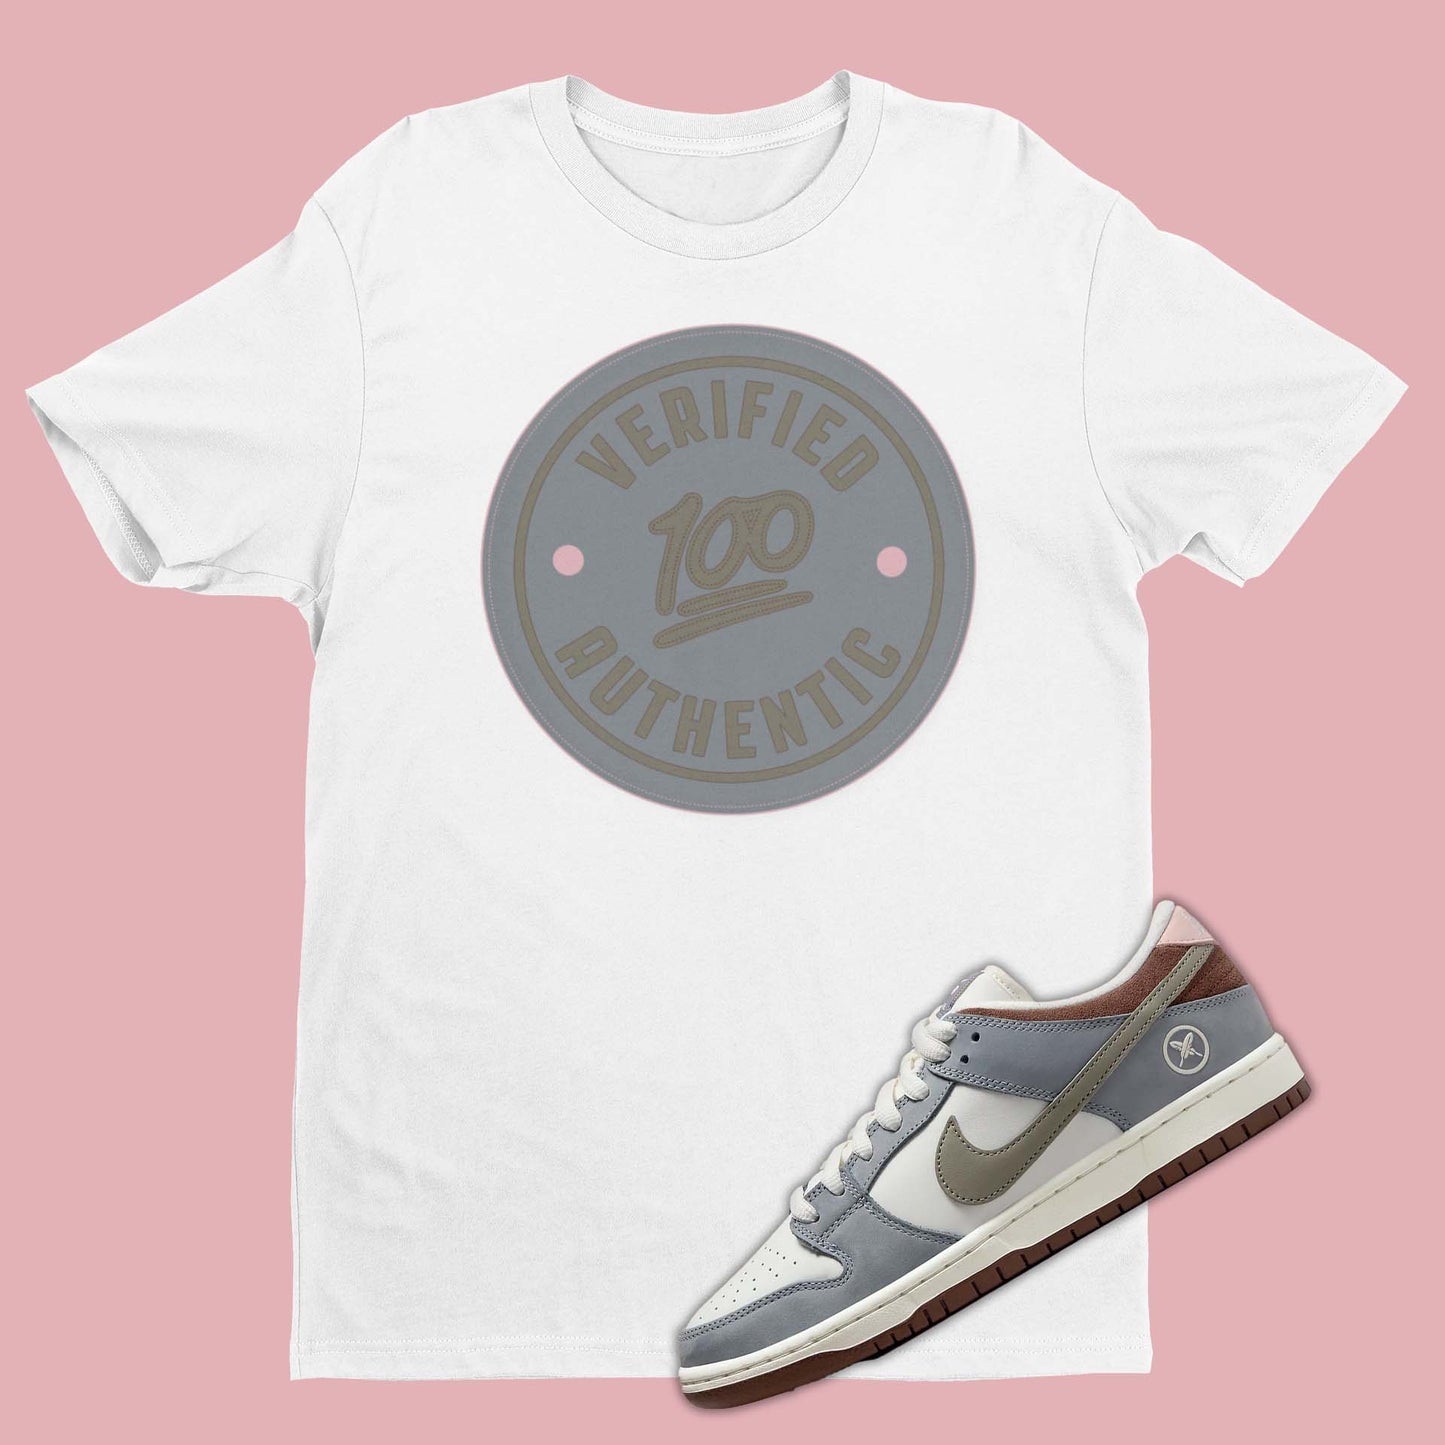 Stay stylish with the Verified Authentic Nike x Yuto Horigomei Dunk Matching T-Shirt from SNKADX